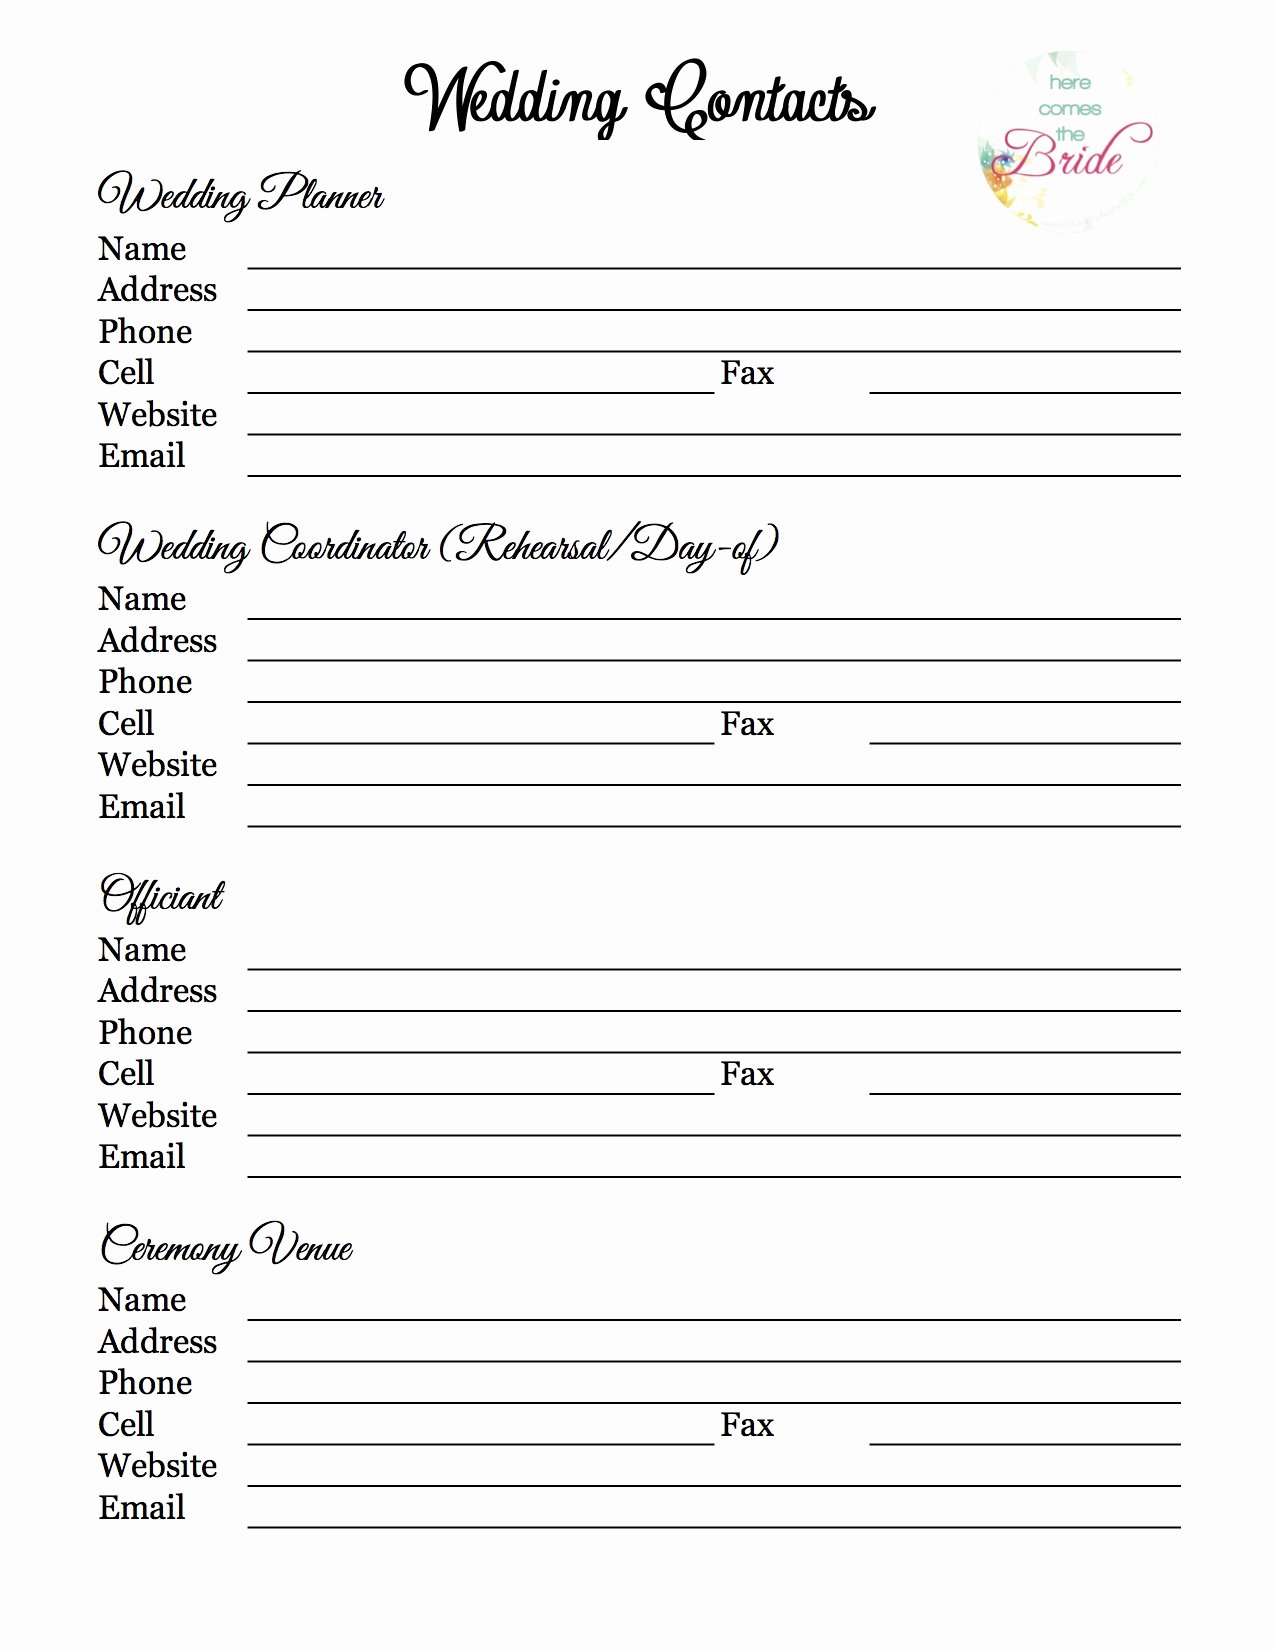 Wedding Planner Questionnaire Template Awesome Wedding Planner with Free Printables – the Refurbished Life